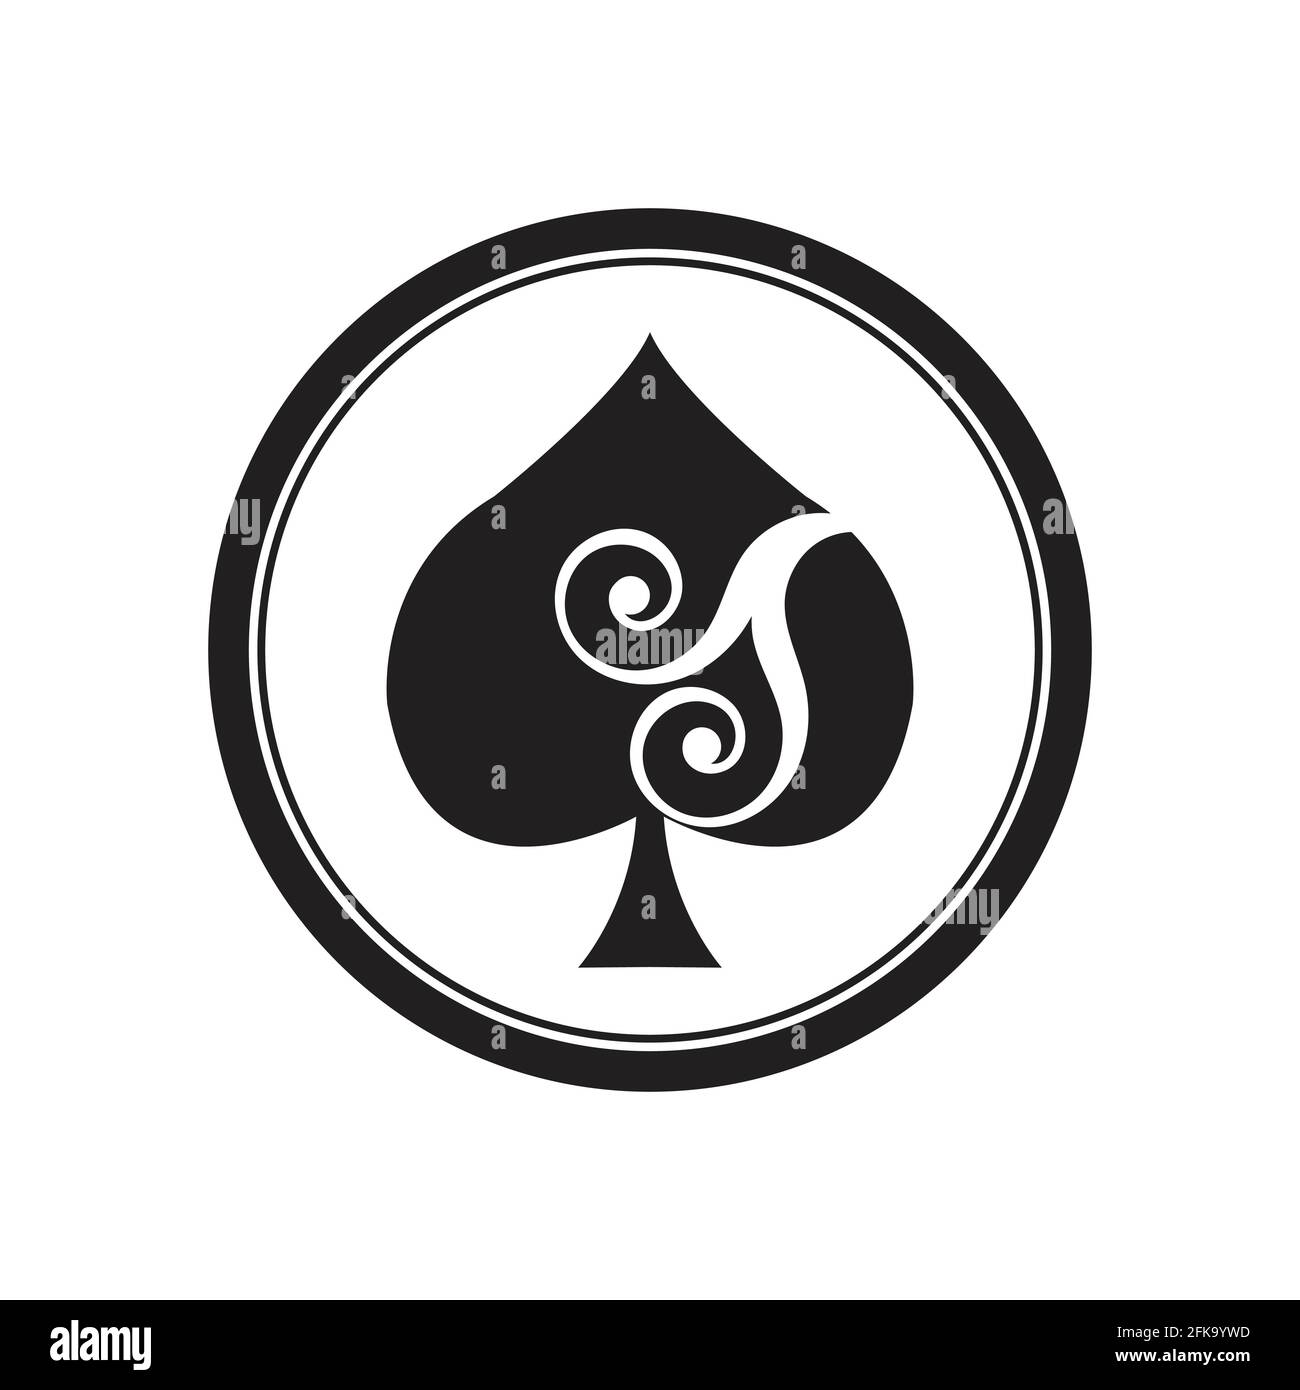 Ace Of Spades Logo Stock Photos and Images - 123RF